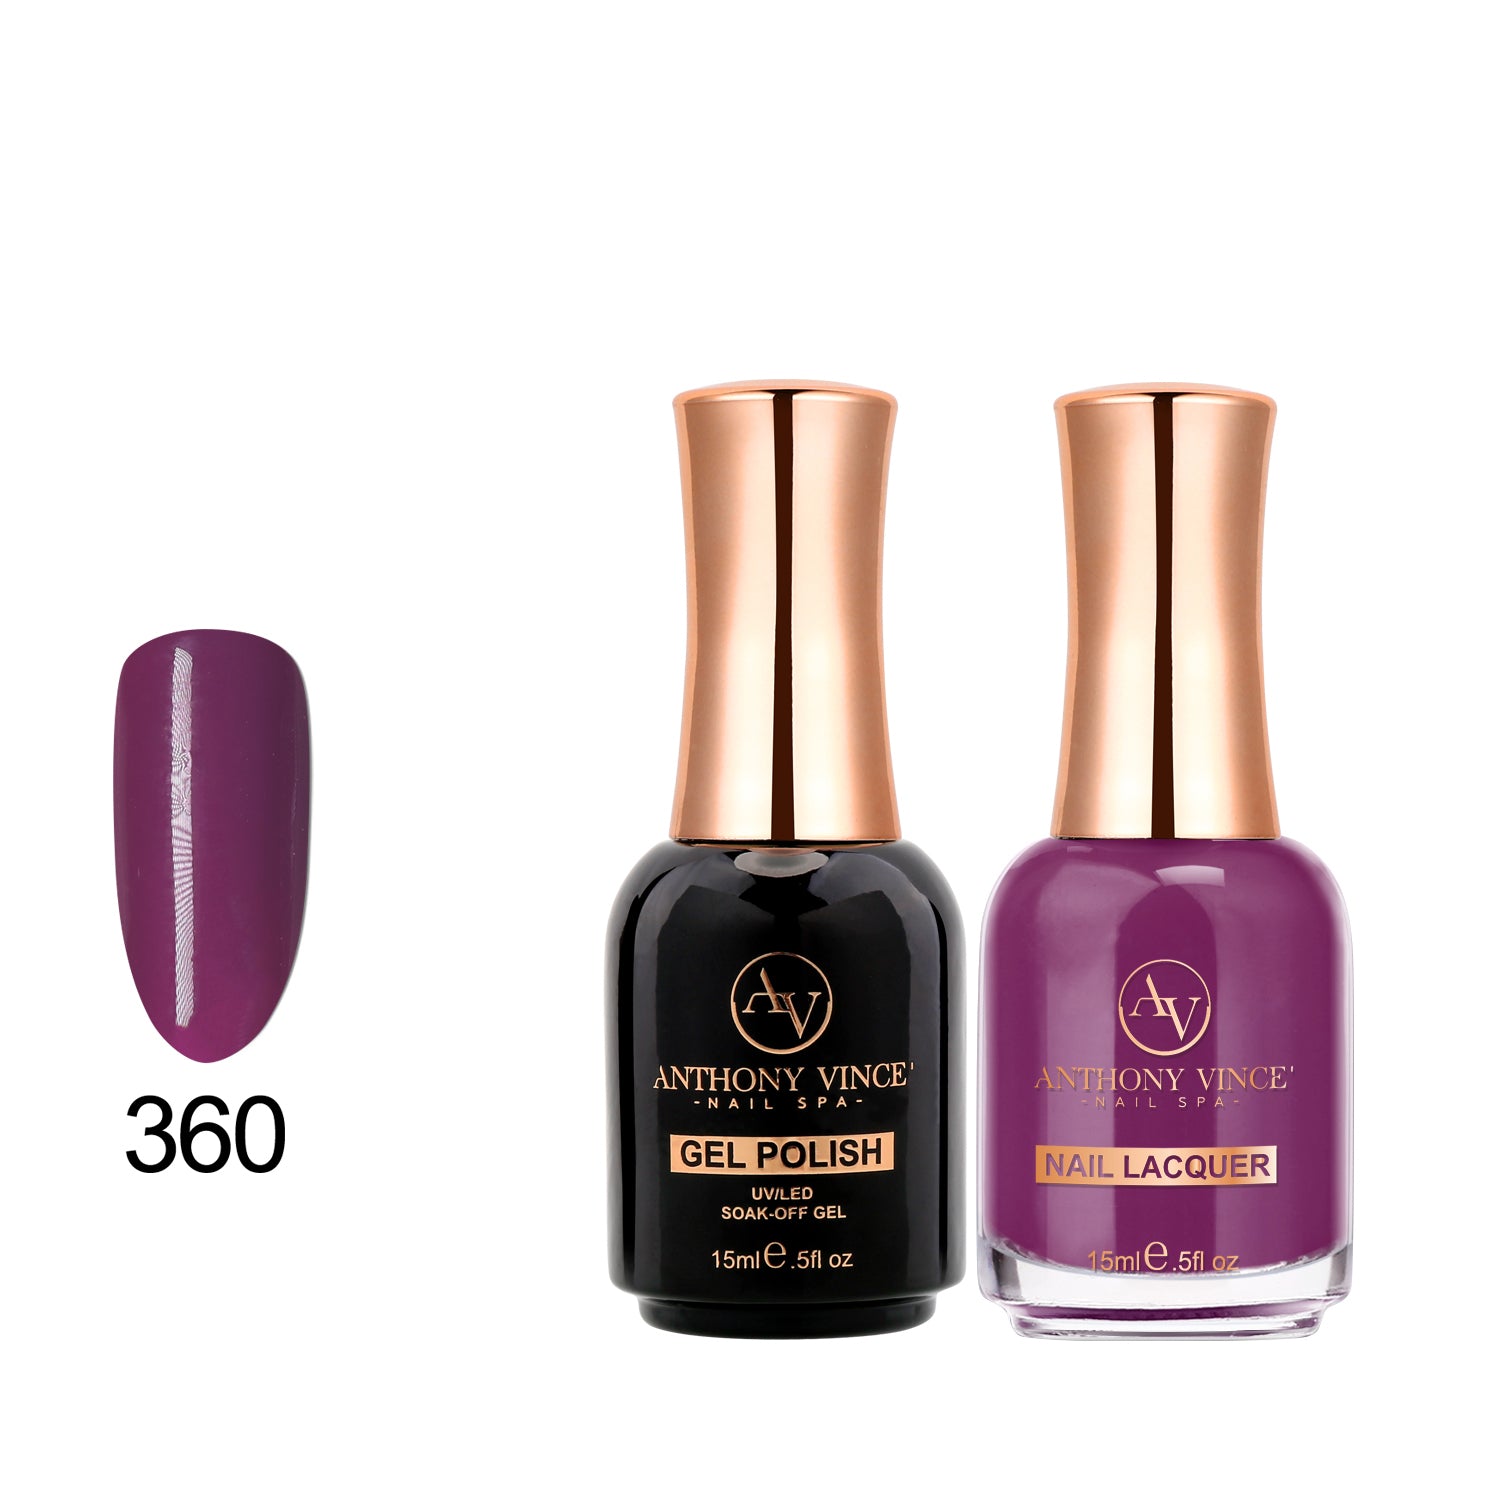 Nail lacquer - couture color - shine and long duration - gel effect -  protective treatment - Sabina